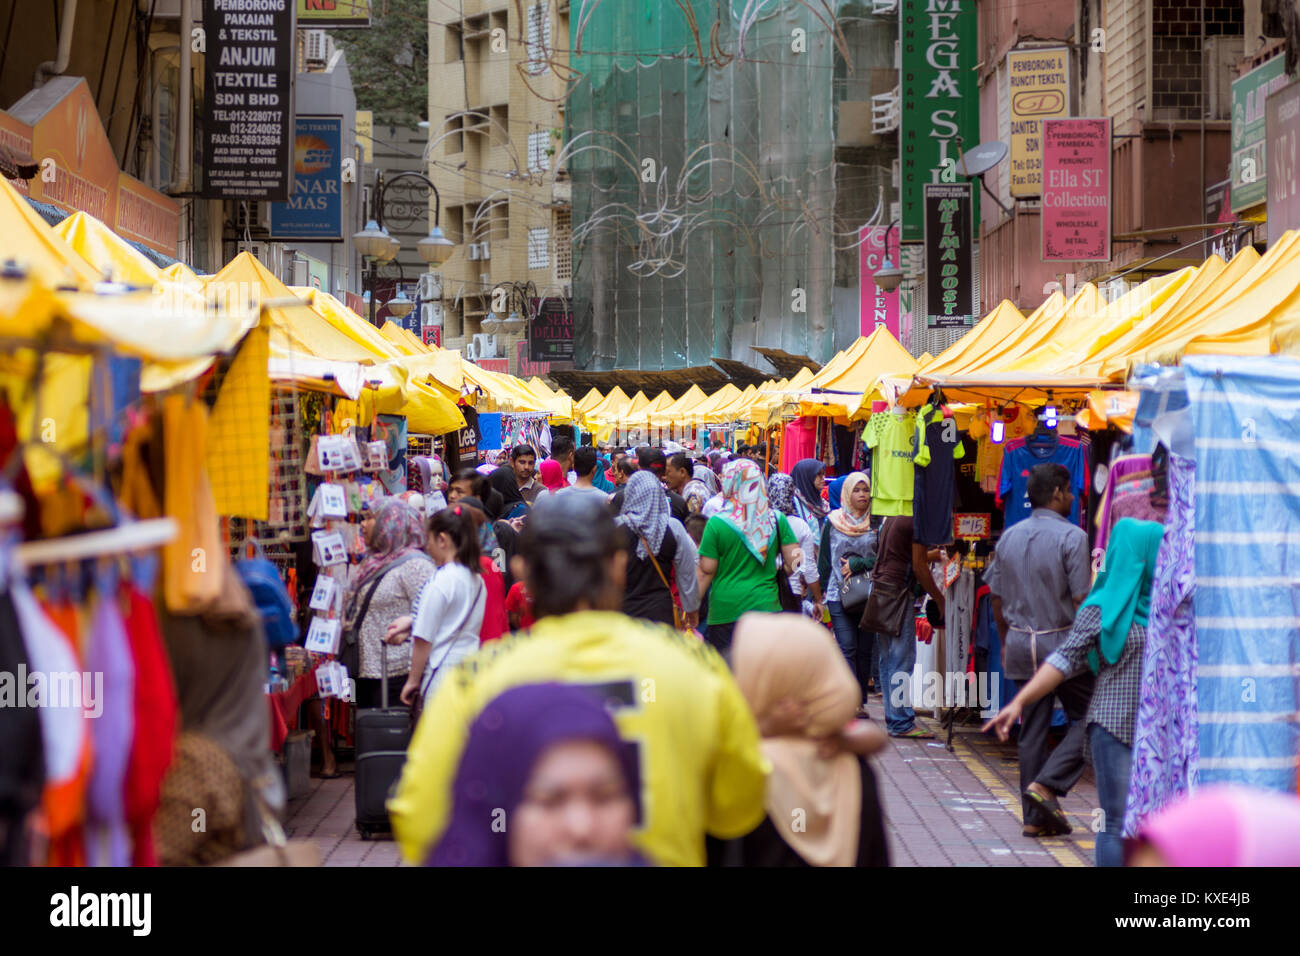 Blurred view of a busy daytime street market. Street busy with people and lined with yellow roofed stalls. Stock Photo